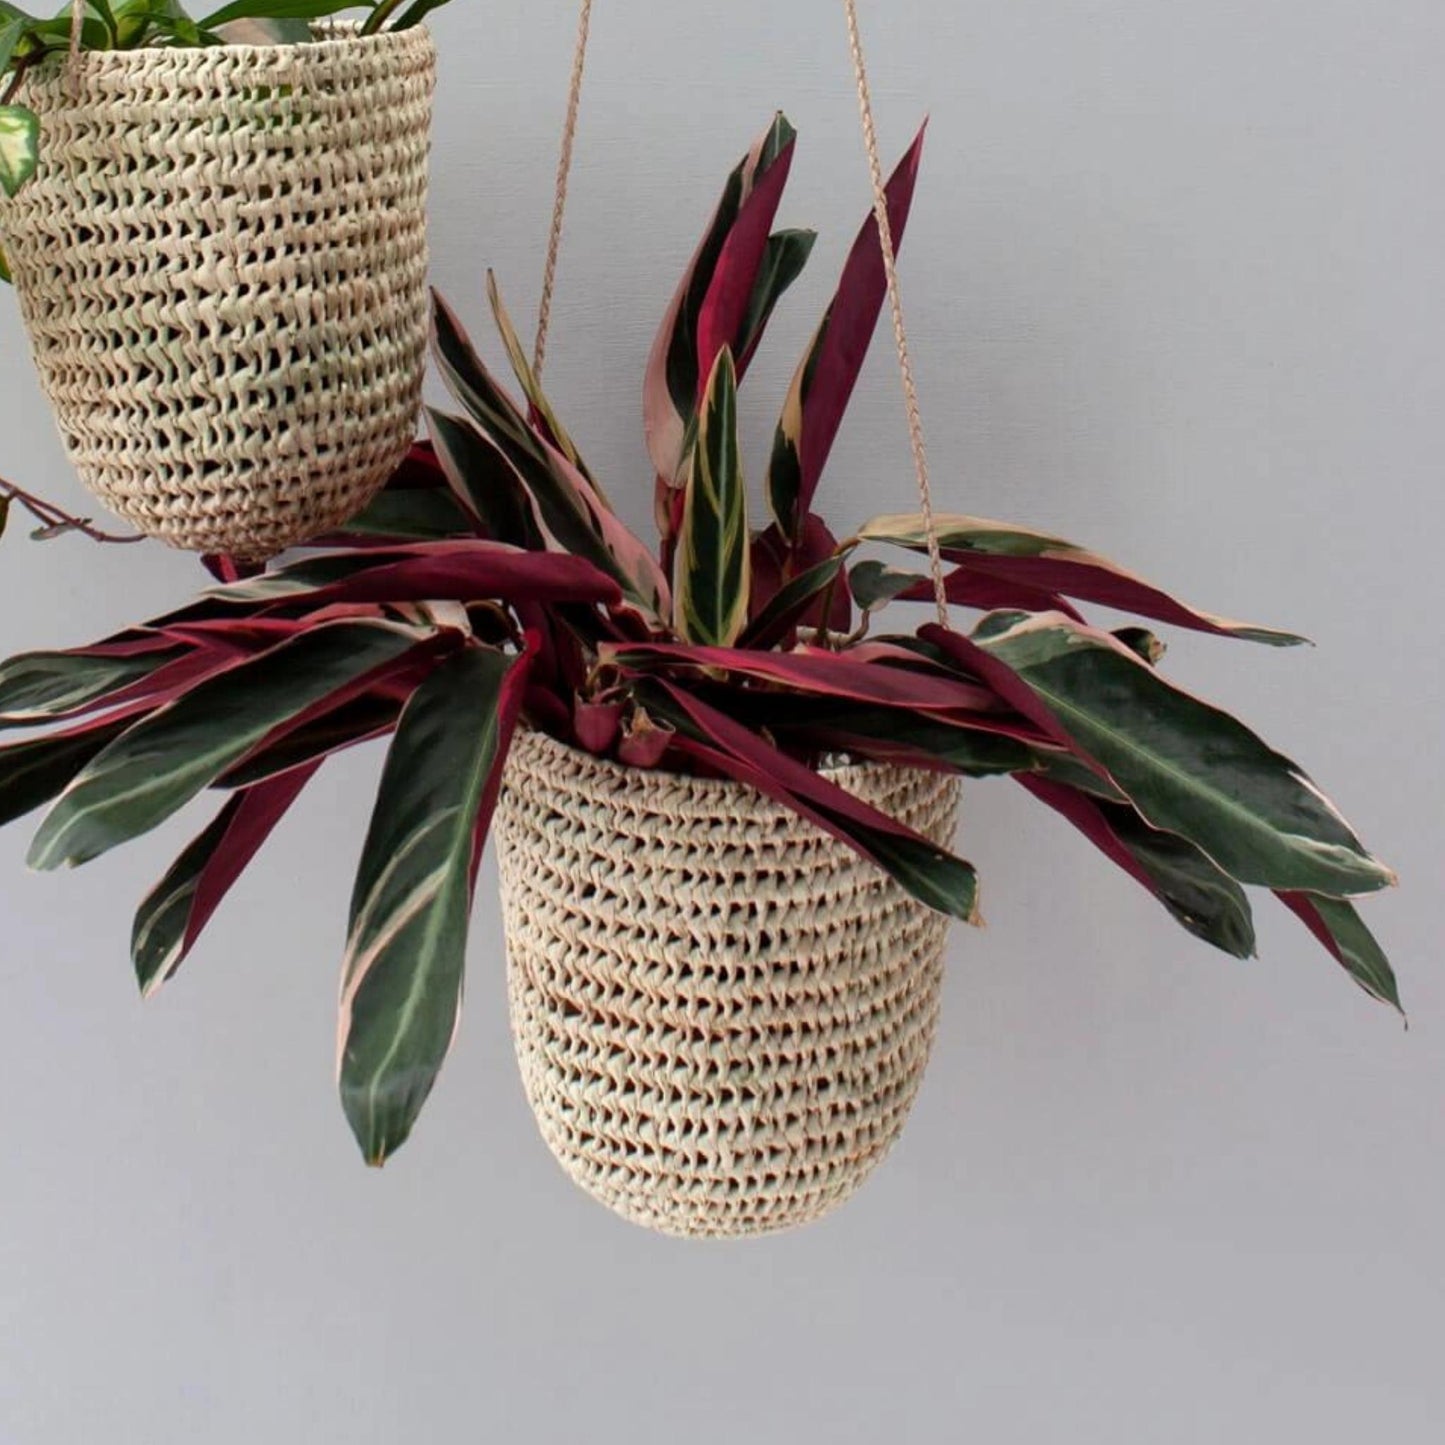 close up of large handwoven dome-shaped hanging palm leaf basket with braided leather strap shown as planter for houseplants